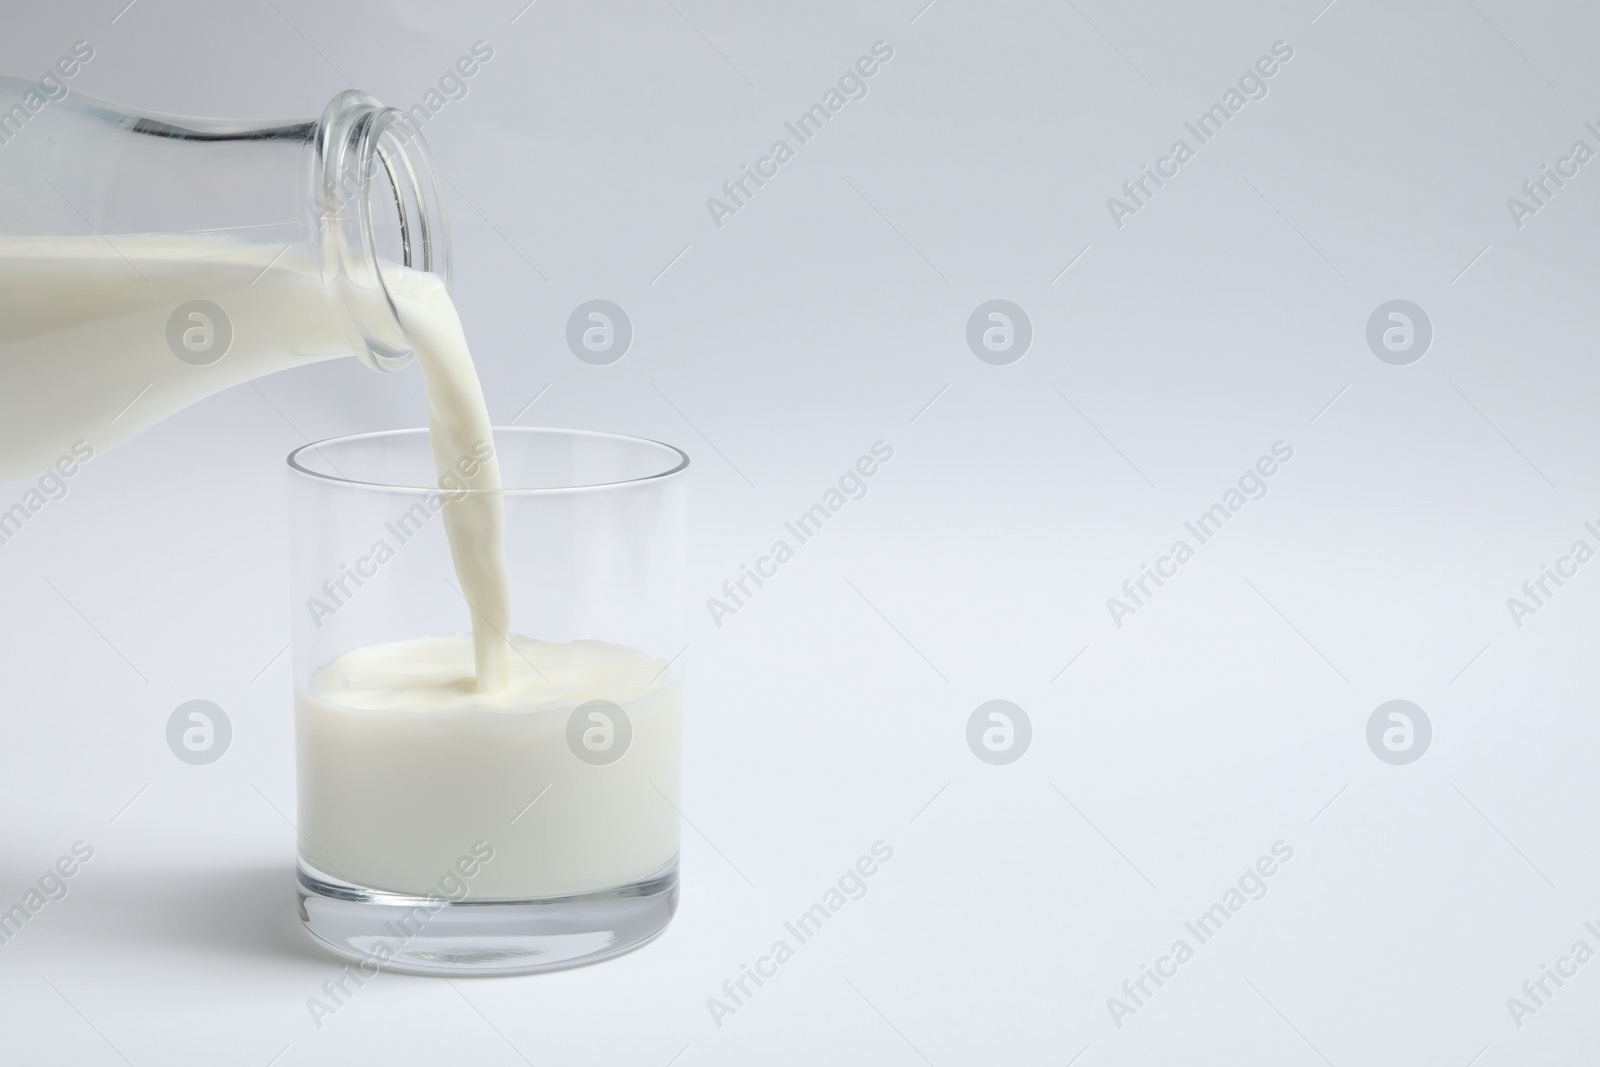 Photo of Pouring milk into glass on white background